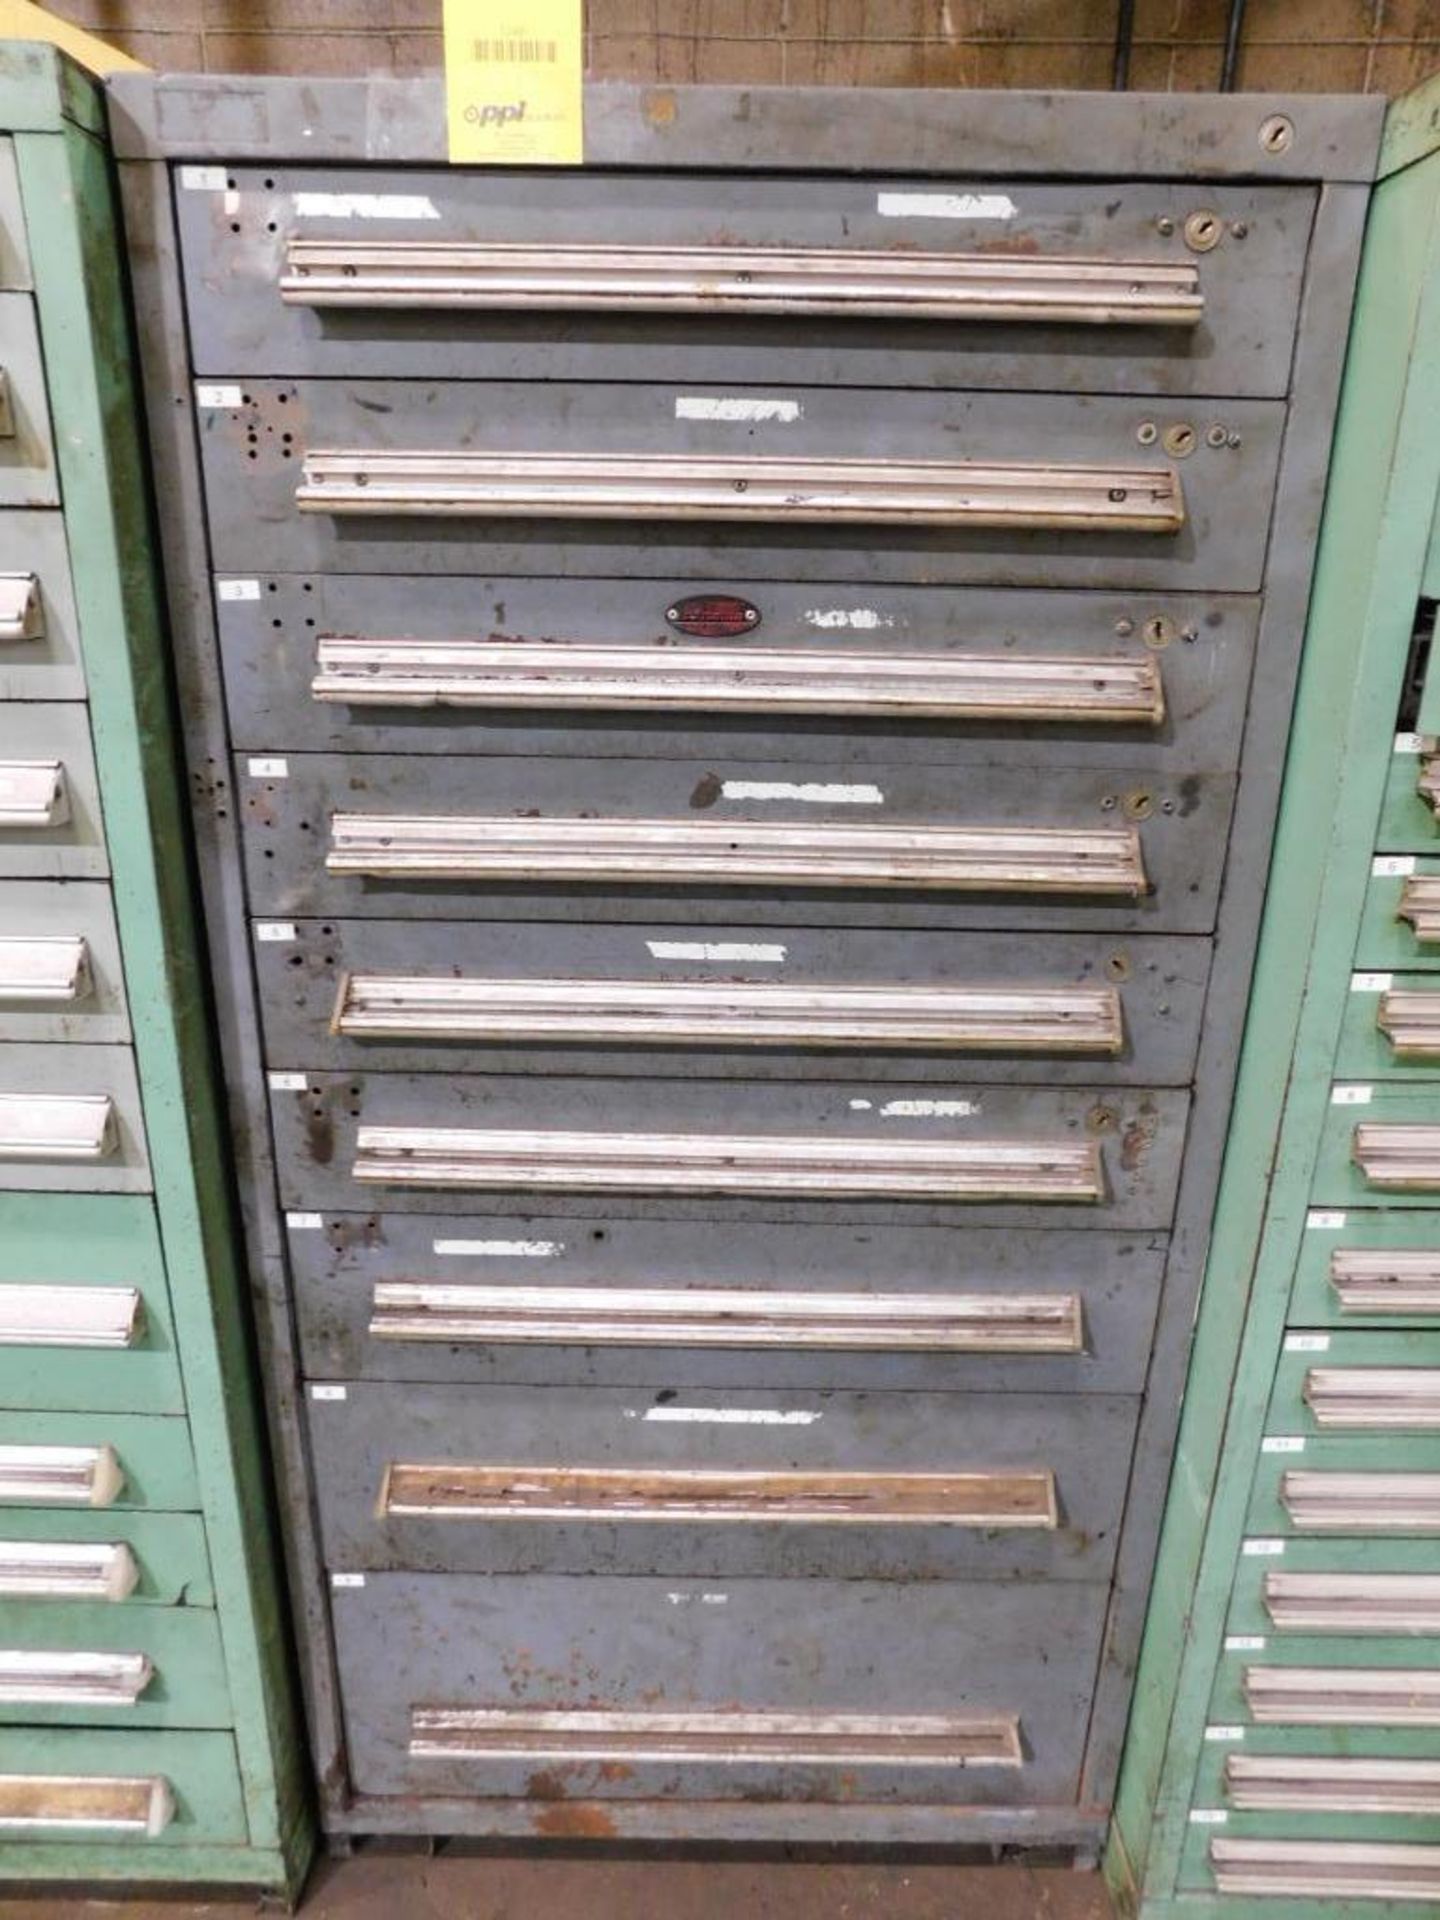 LOT: (1) 13-Drawer Tooling Cabinet, (1) 11-Drawer Tooling Cabinet - Image 2 of 3